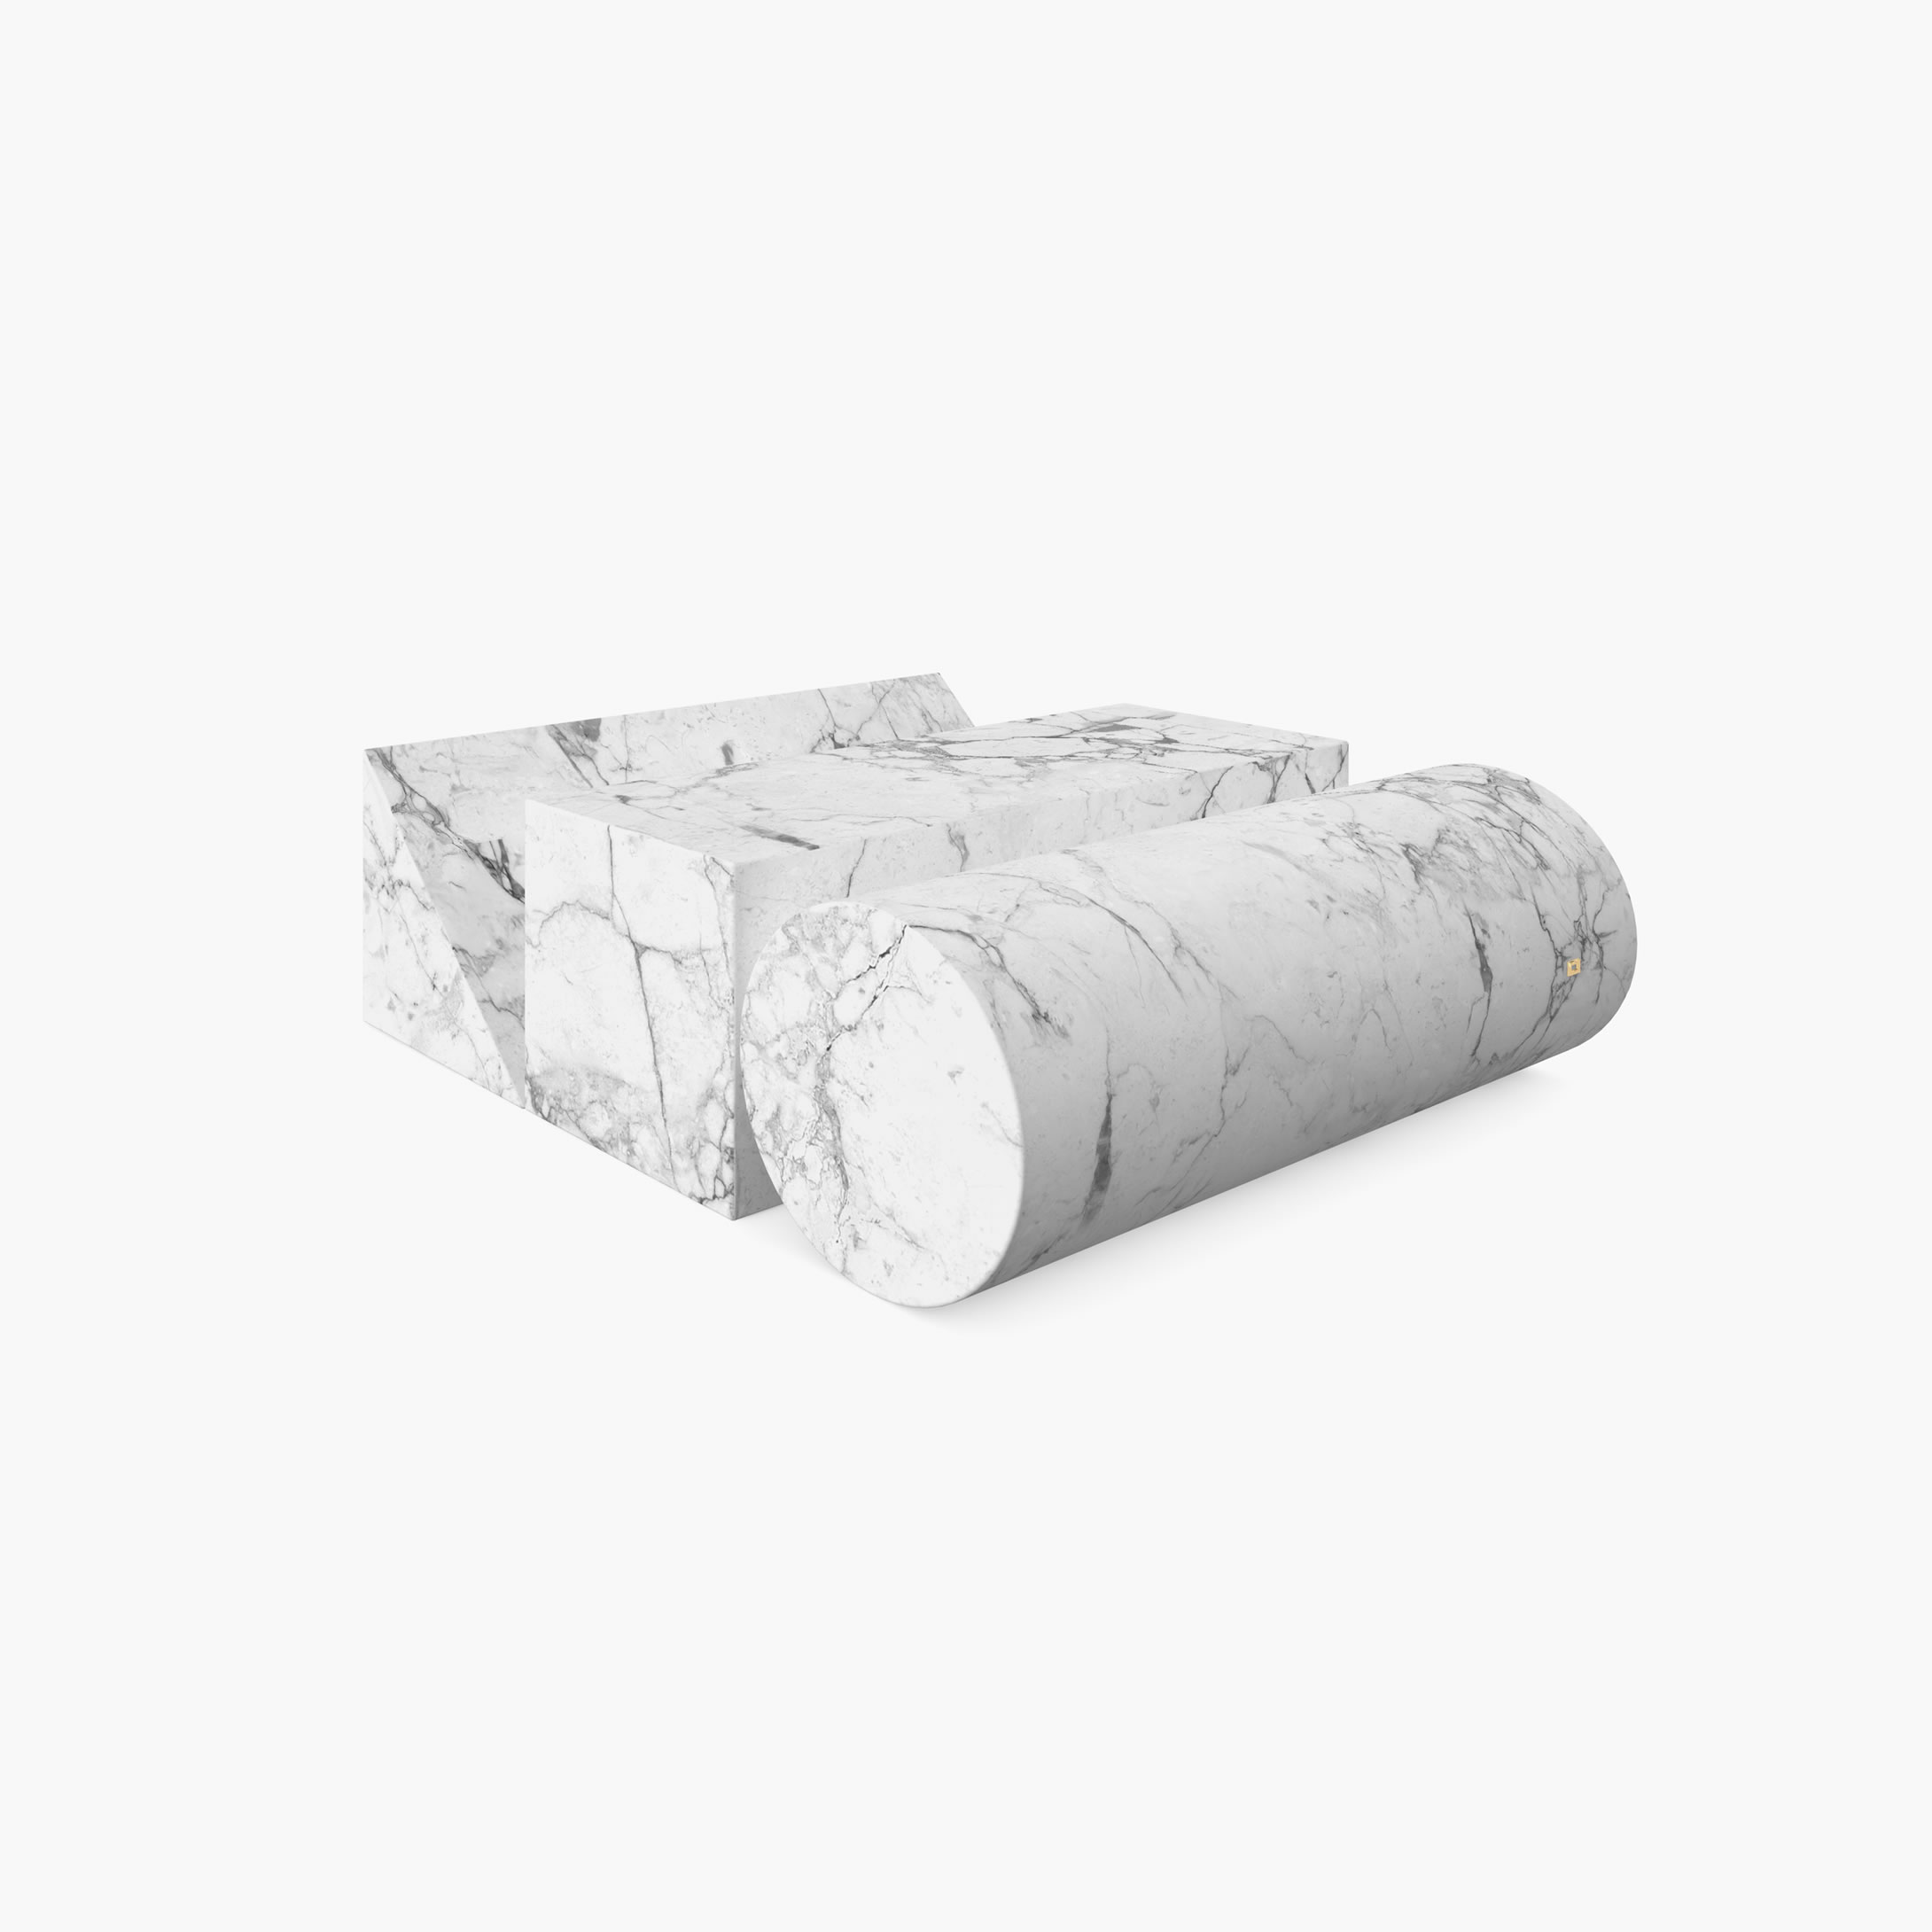 Coffee Table Cylinder cuboid prism White Arabescato Marble futuristic Sitting Room Luxury Center  Coffee Tables FS 440 FELIX SCHWAKE